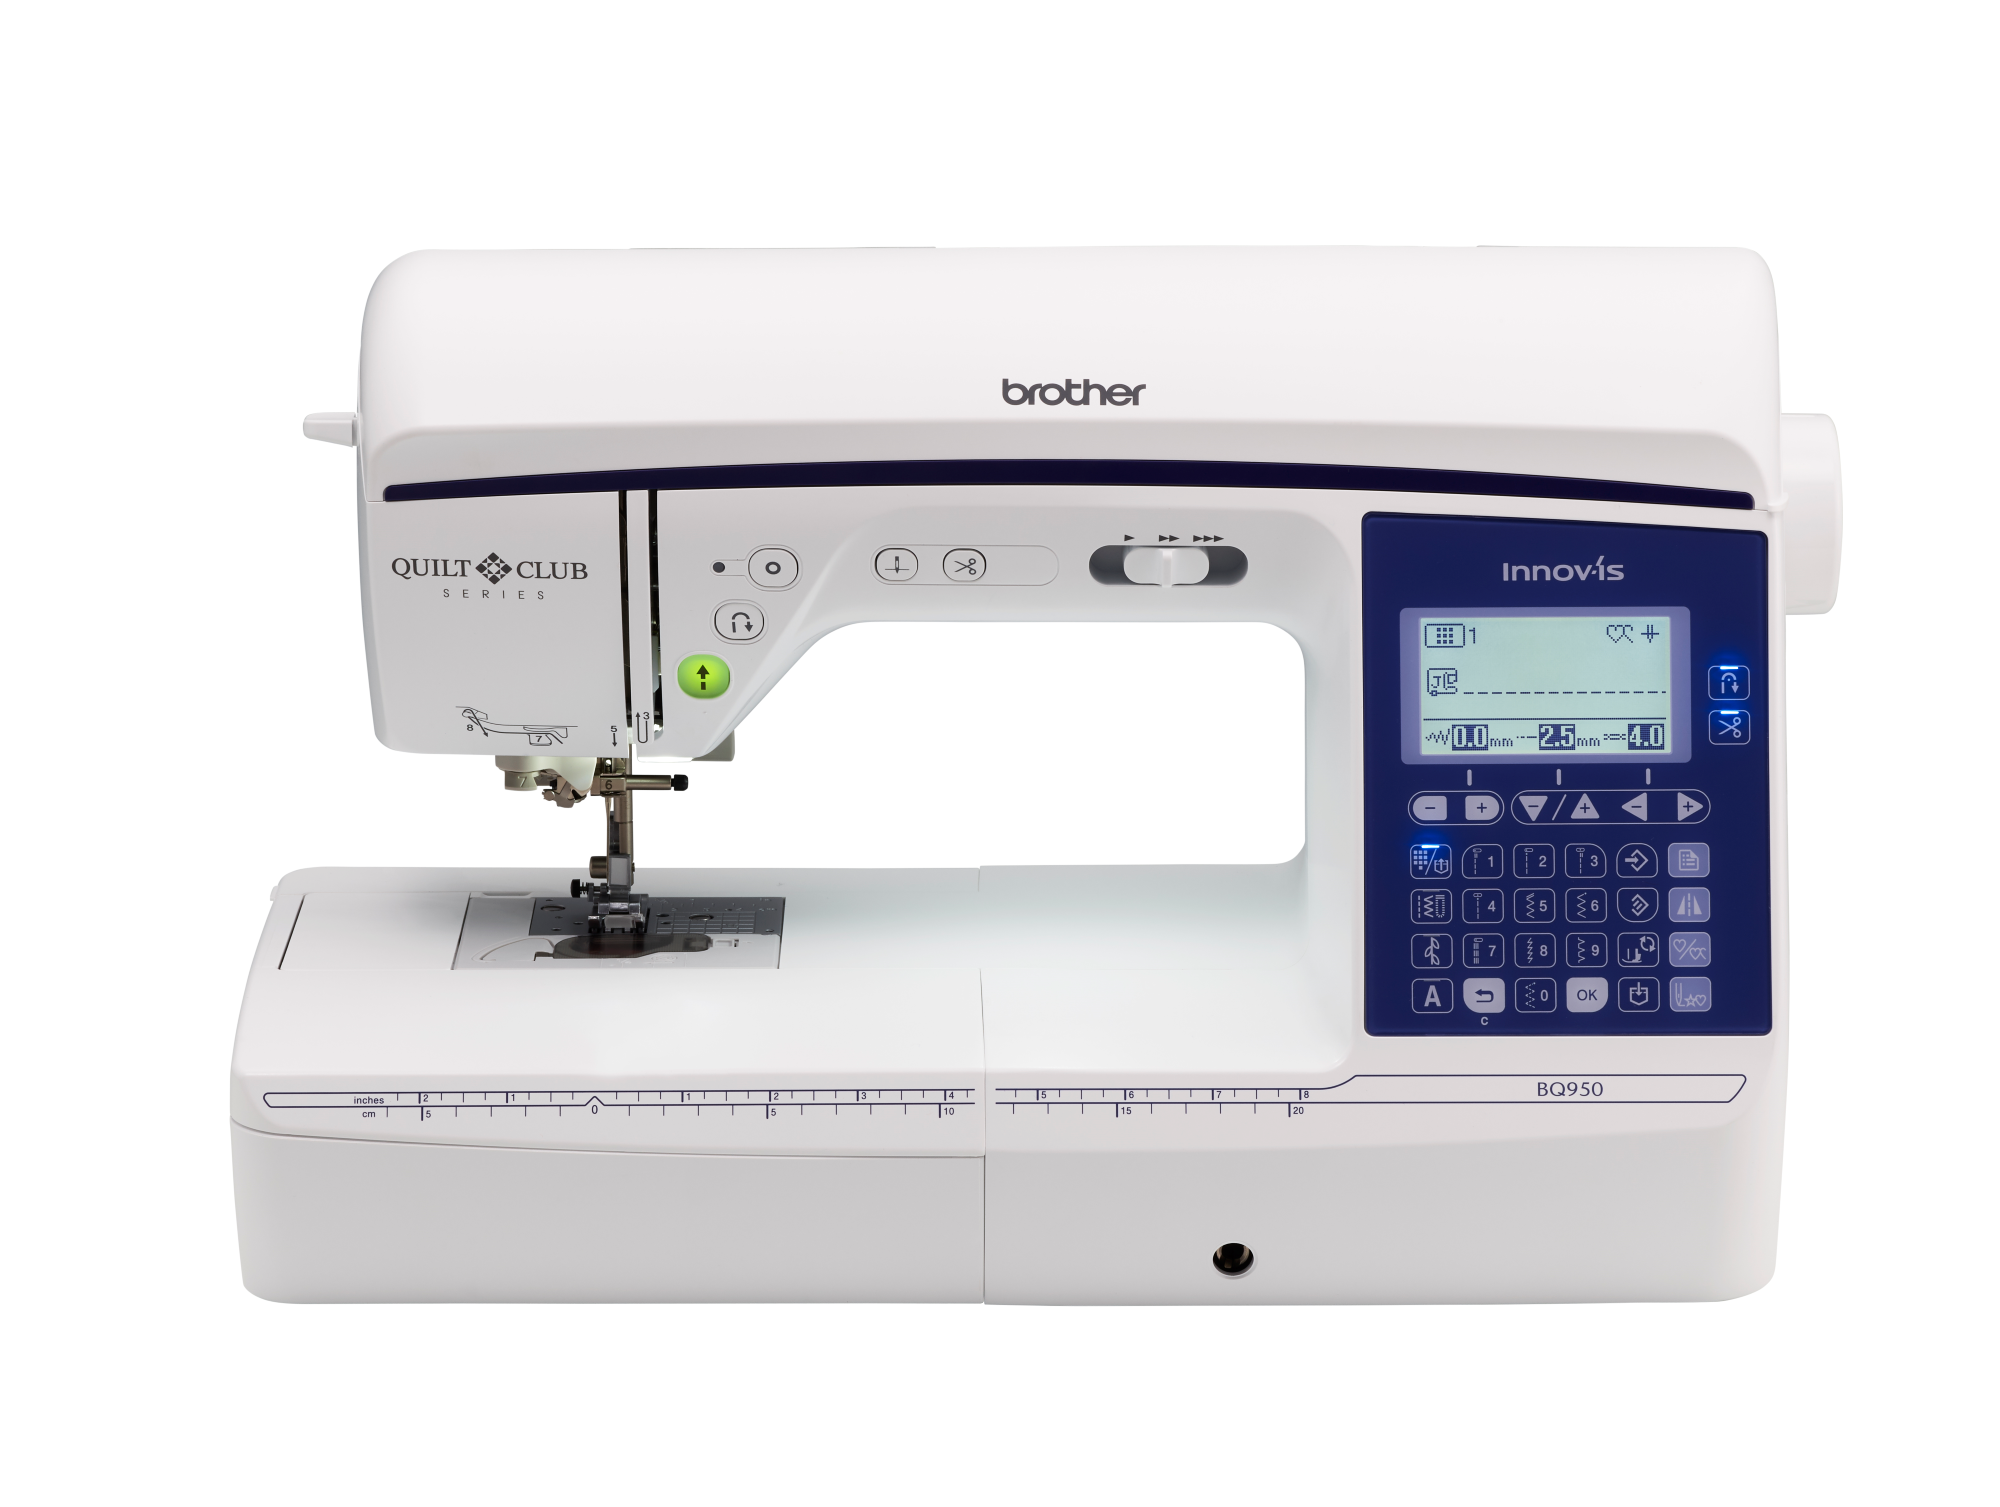 Brother CP100X Computerized Sewing and Quilting Machine